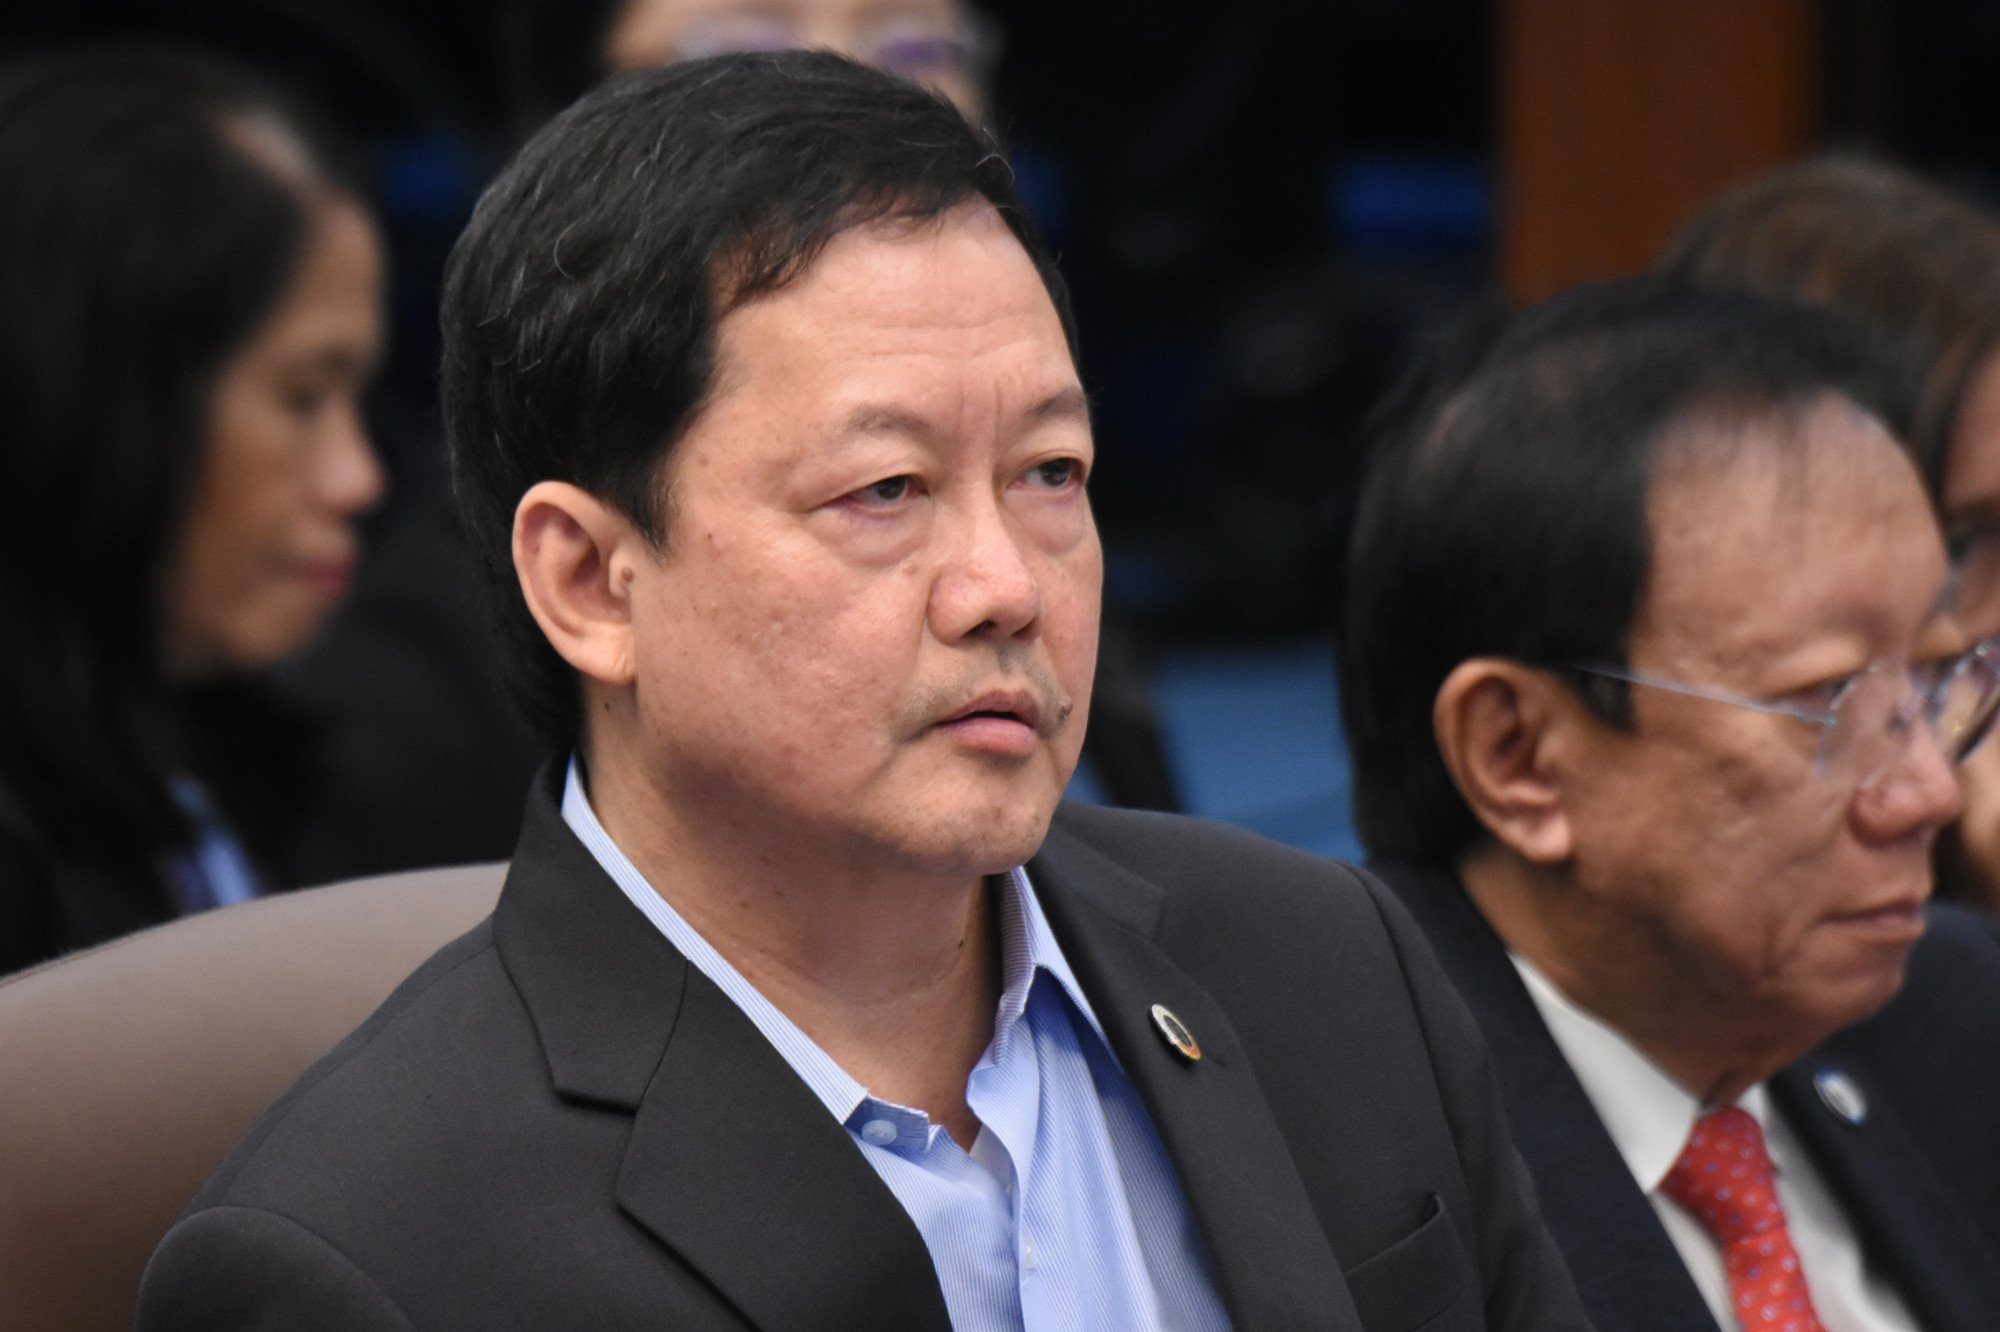 No reason to prevent ICC investigators from entering PH, says Guevarra